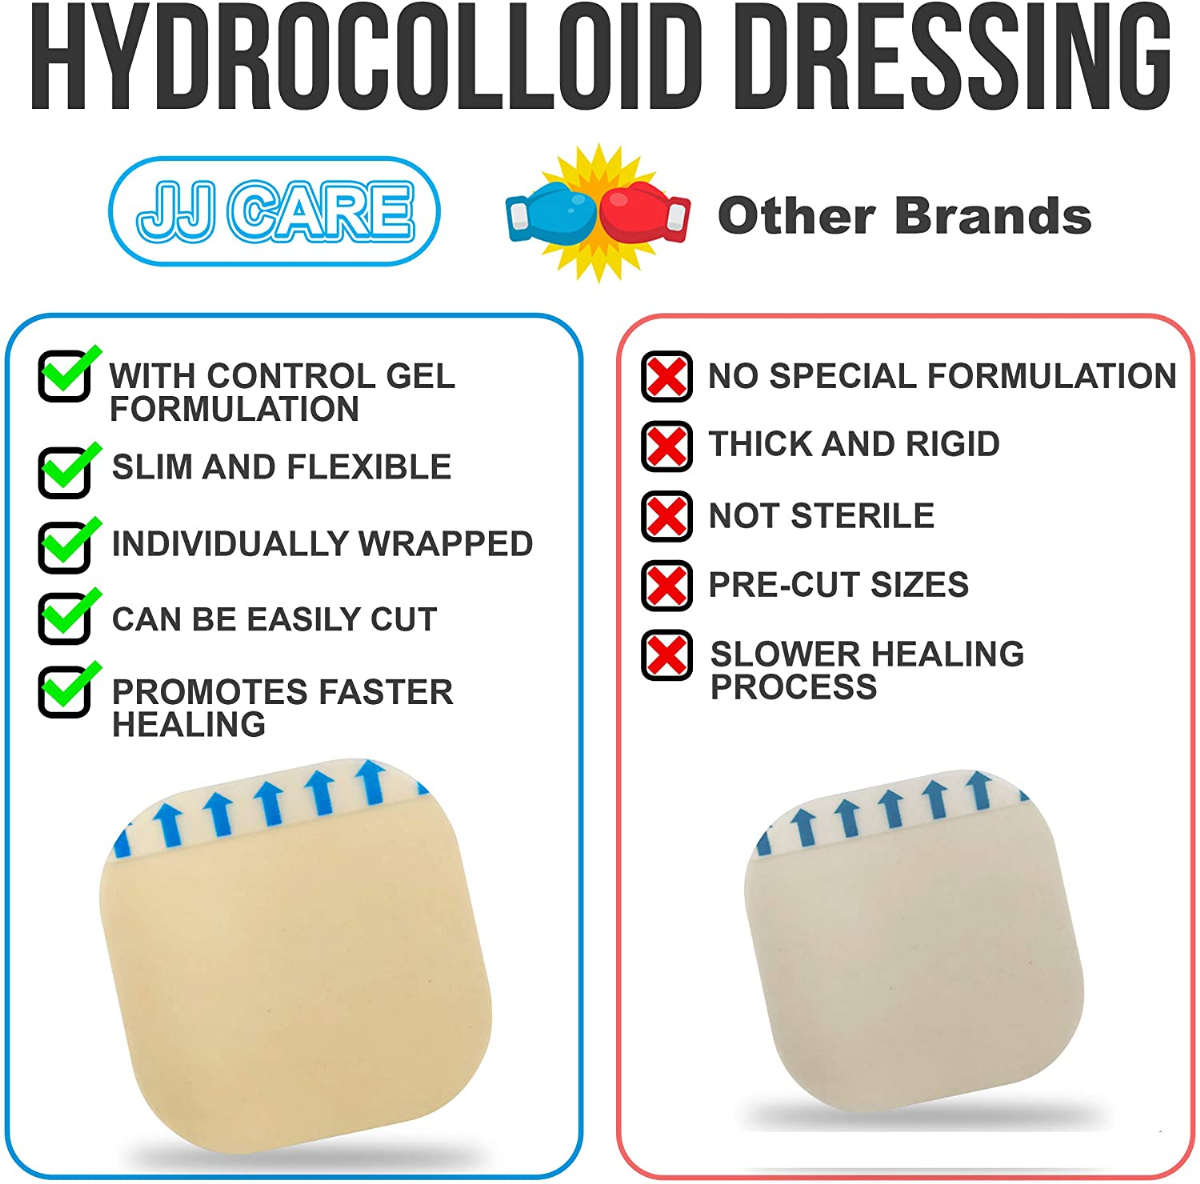 JJ CARE [Pack of 10] Thin Hydrocolloid Dressing Without Border 2x2  Hydrocolloid Patches, Sterile Adhesive Hydrocolloid Bandages, Wound  Dressing & Bed Sore Pads for Advanced Healing